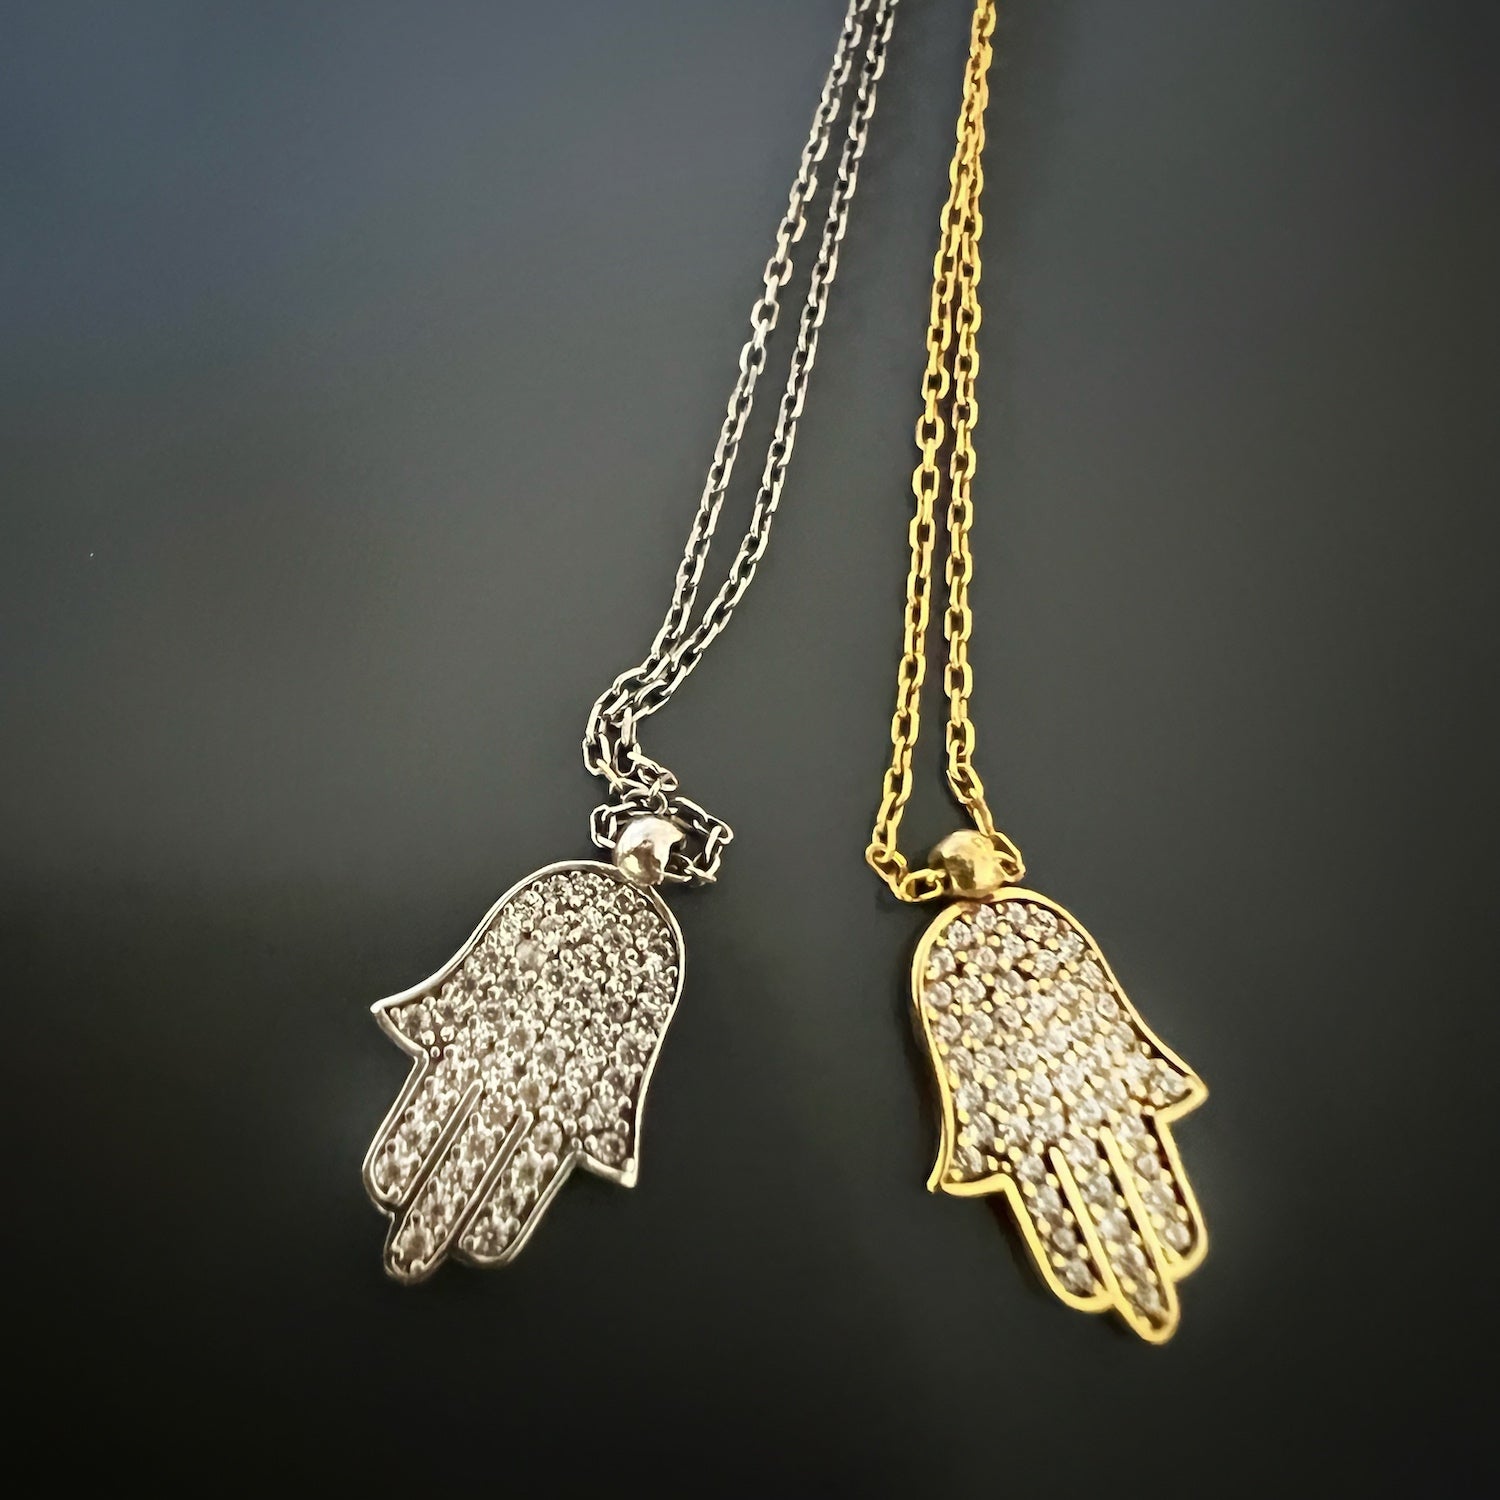 Hamsa Talisman Necklace with Zircon Stone - Enhance your style with this elegant necklace featuring a Hamsa talisman pendant and a dazzling zircon stone.